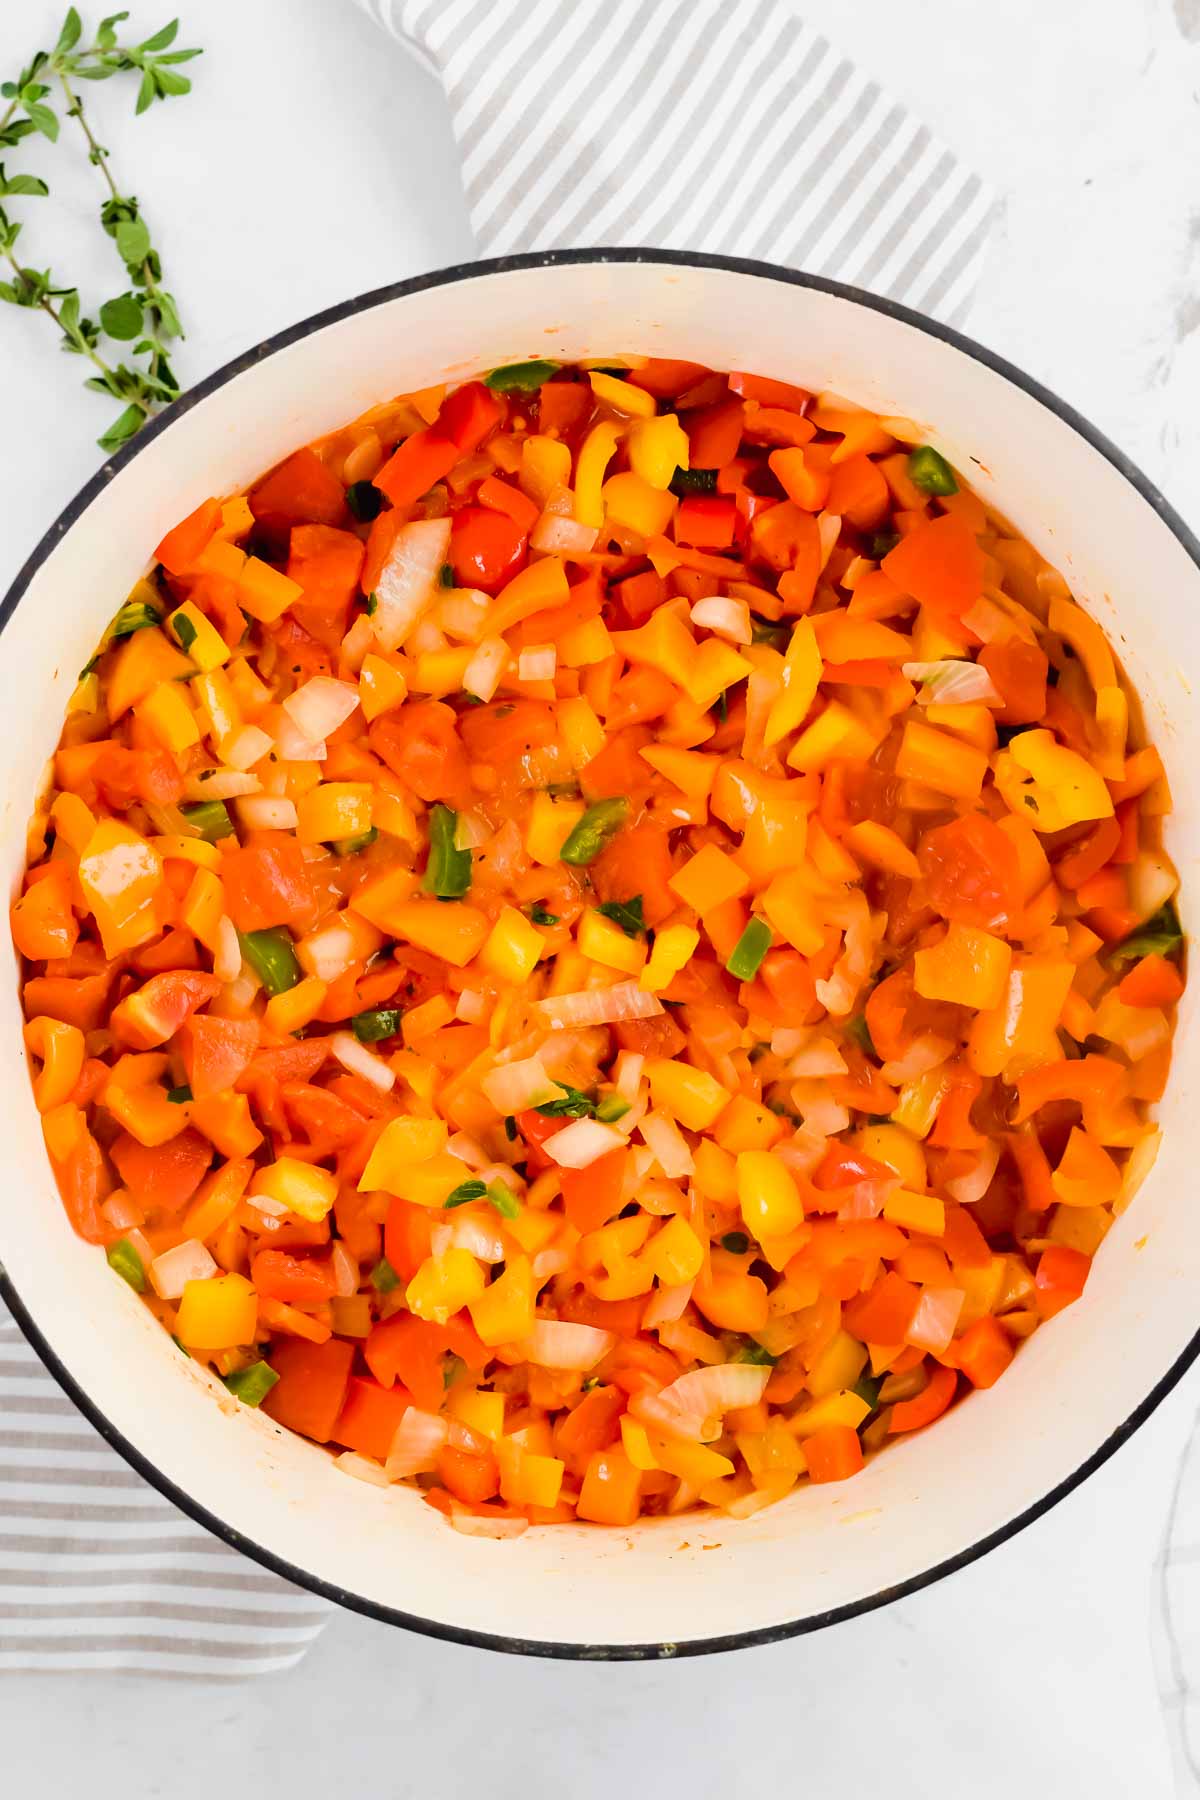 Large pot filled with carrots, peppers and onions.